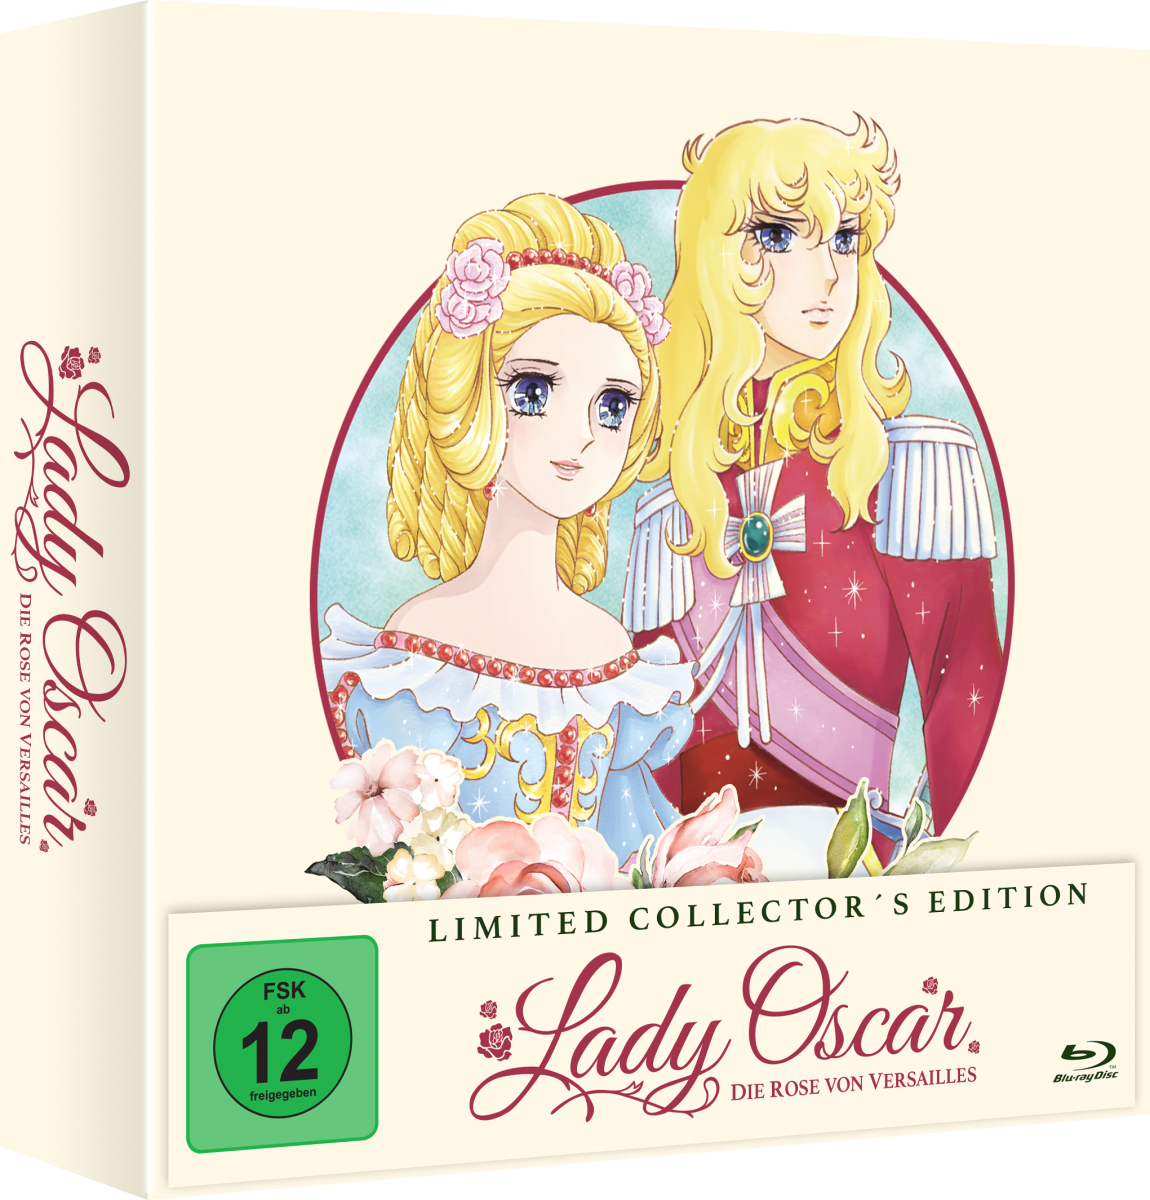 Lady Oscar - Die Rose von Versailles - Limited Collector's Edition [Blu-ray] Image 2